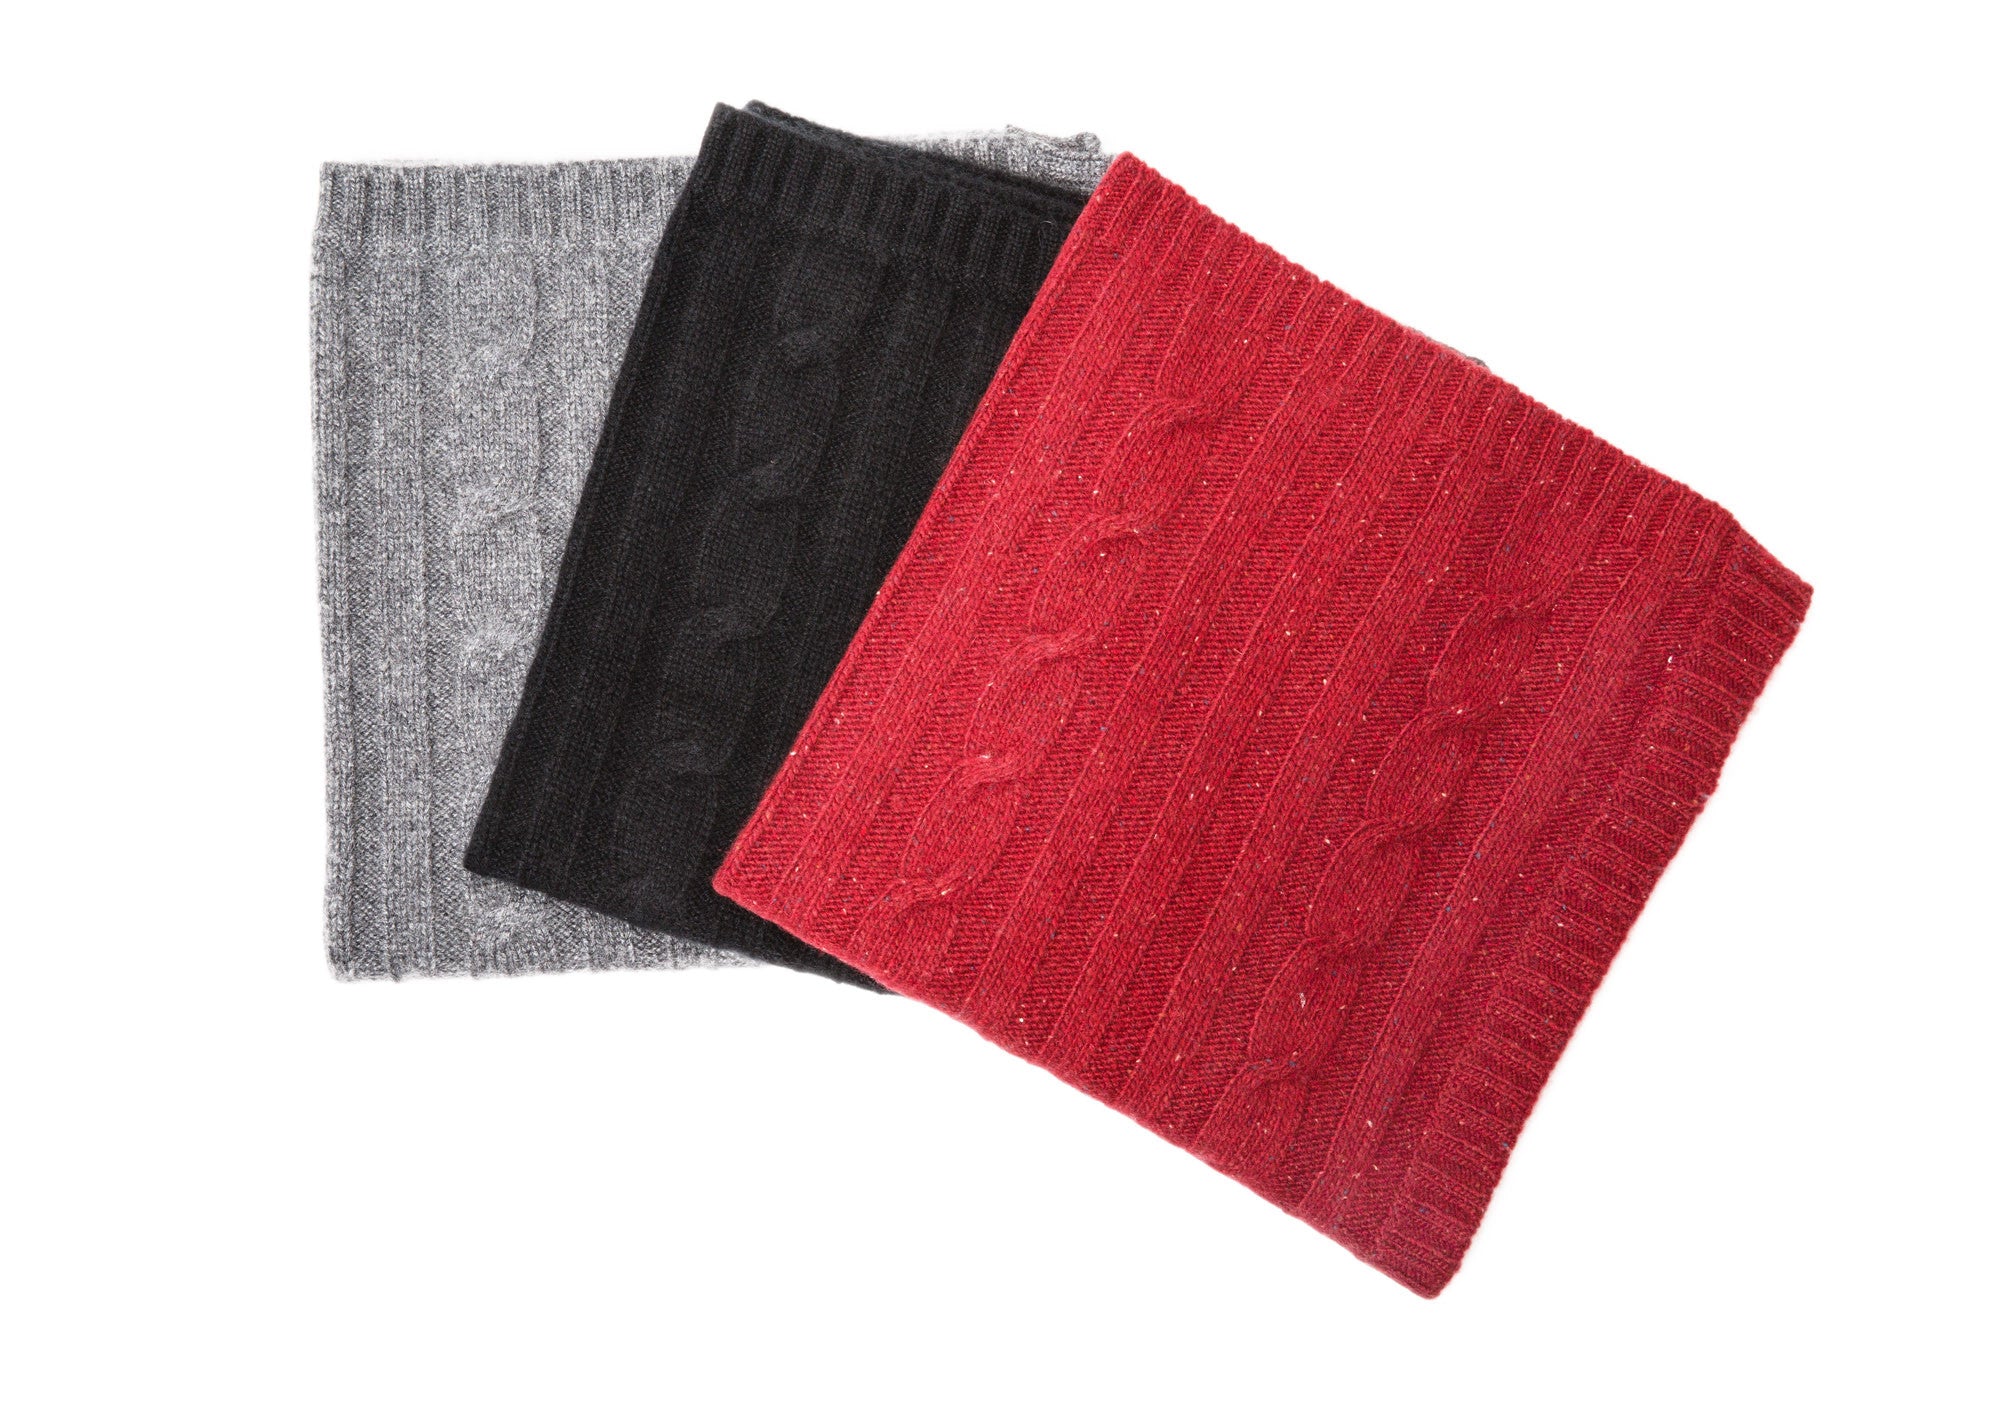 Cashmere Blanket - Gray, Black, or Burgundy - Canine Styles - 3 Color